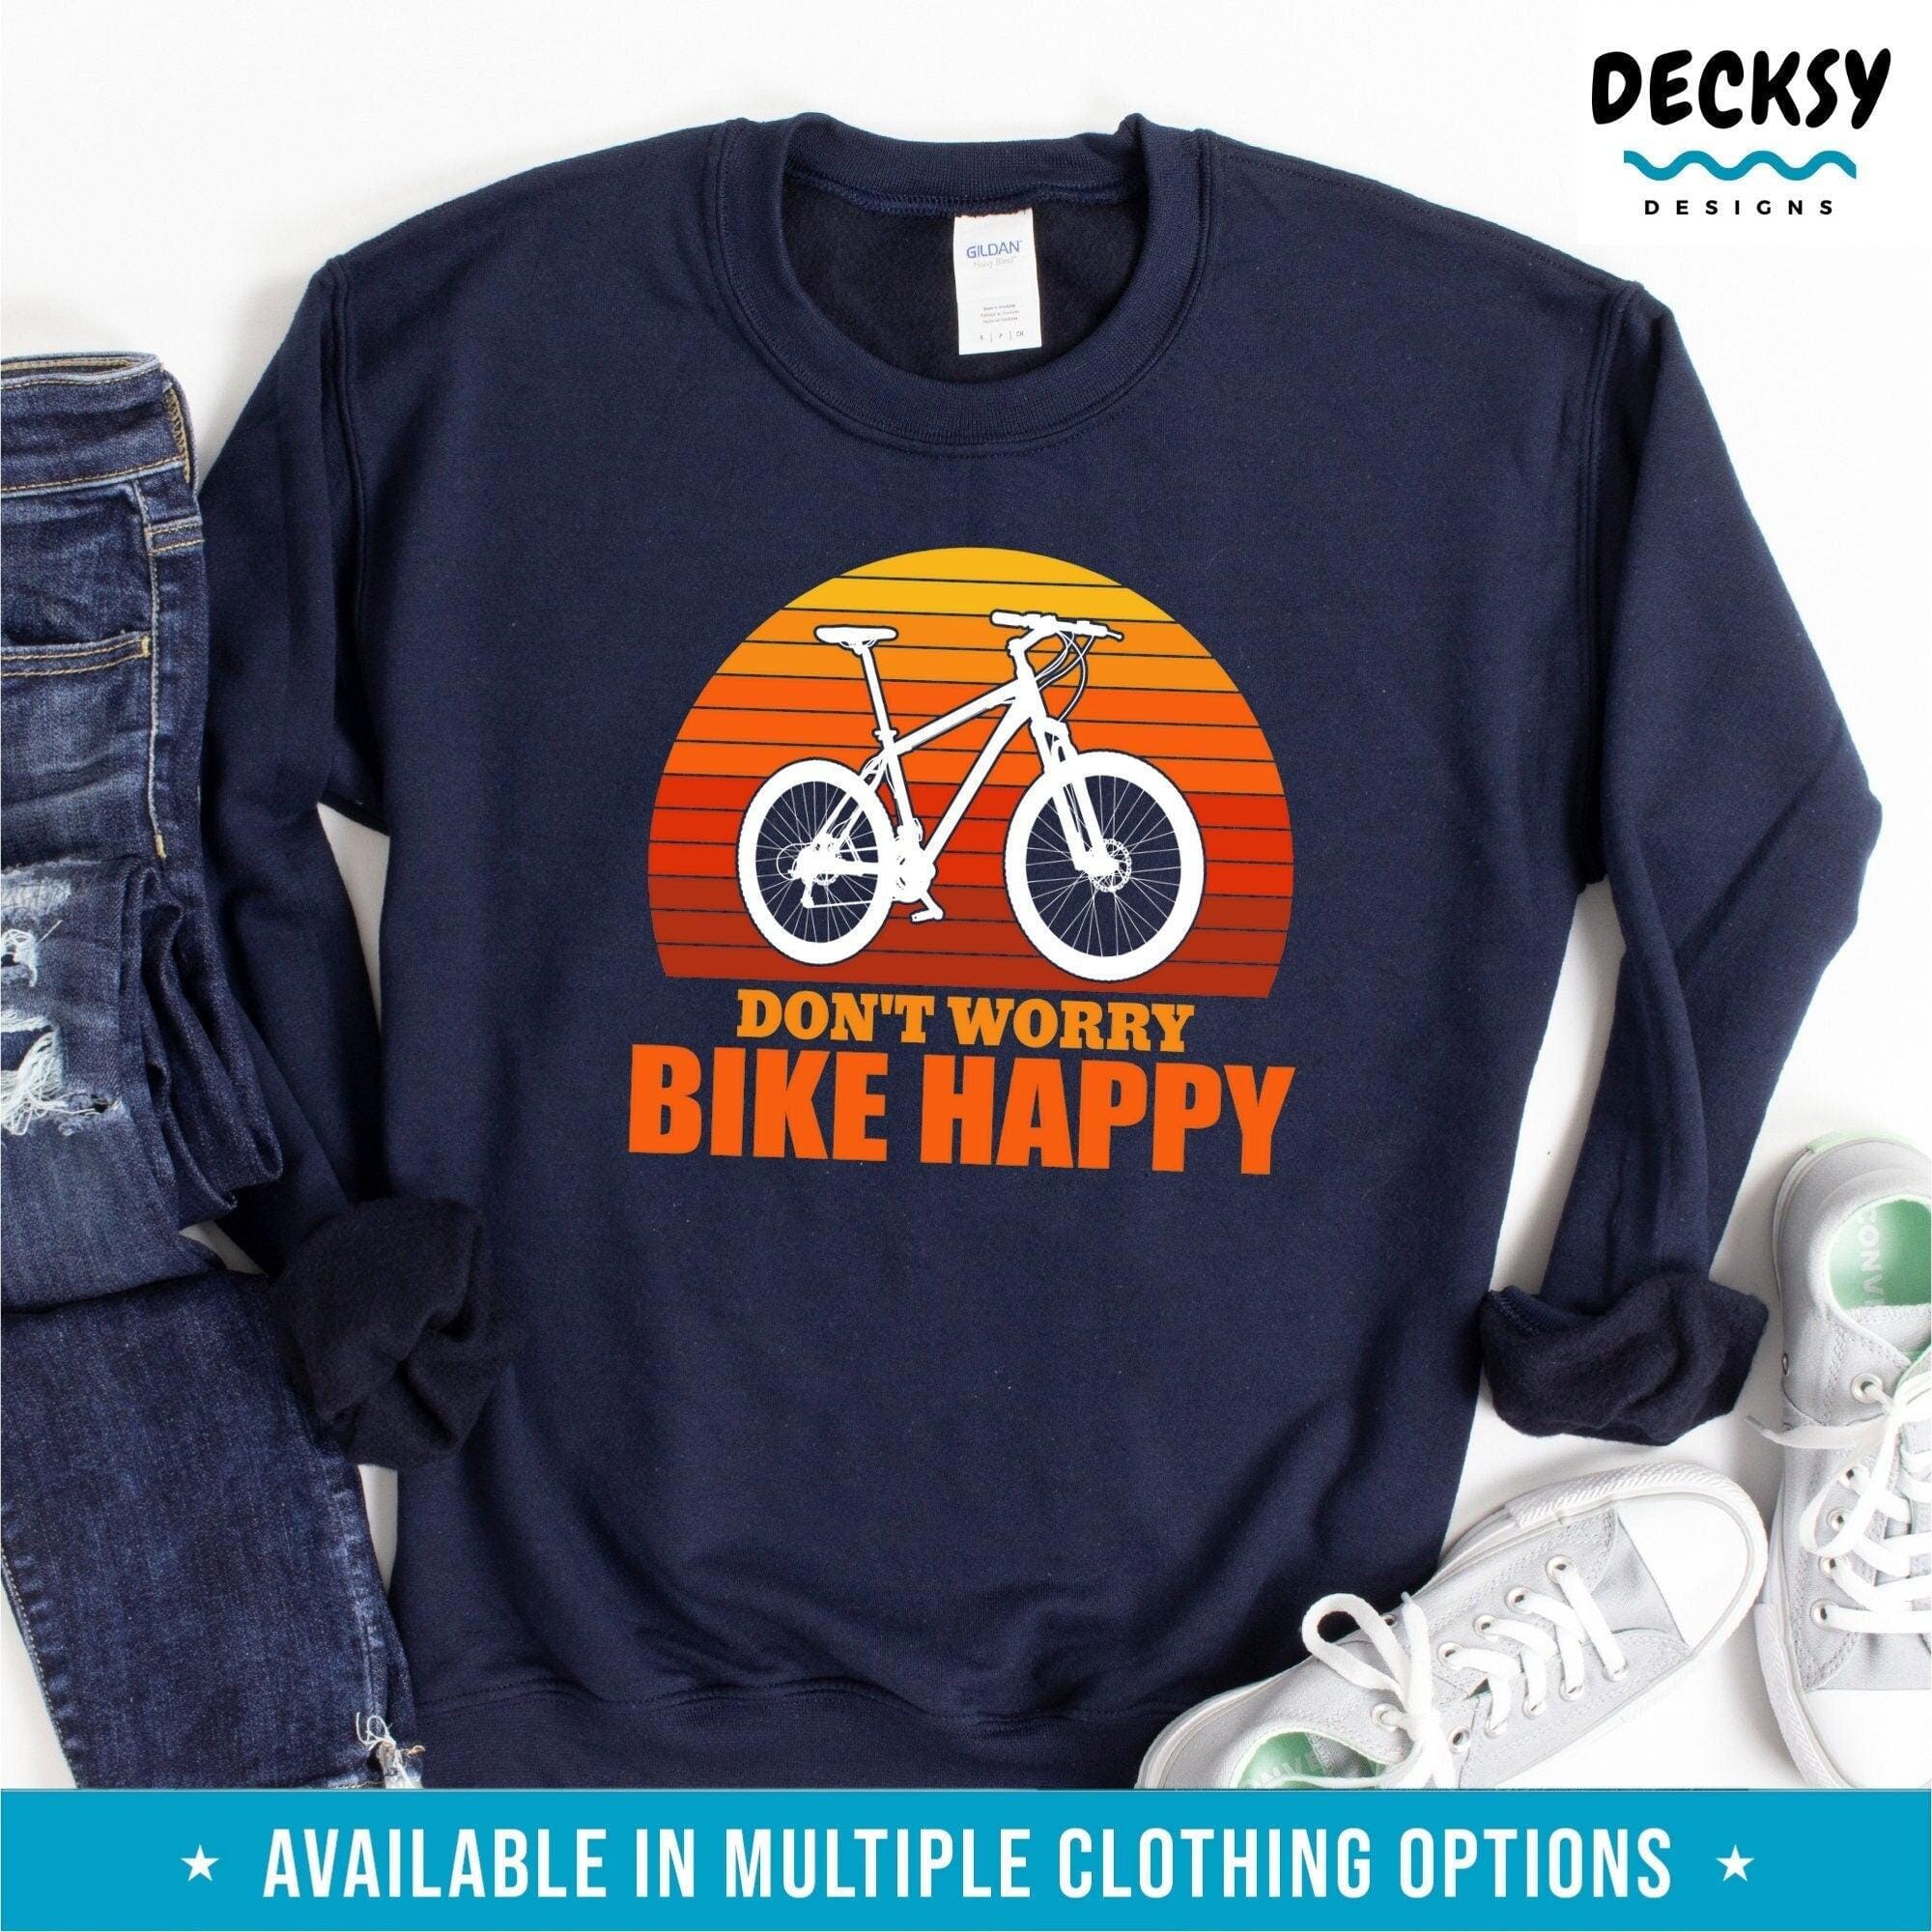 Bike Shirt, Cycling Gift-Clothing:Gender-Neutral Adult Clothing:Tops & Tees:T-shirts:Graphic Tees-DecksyDesigns